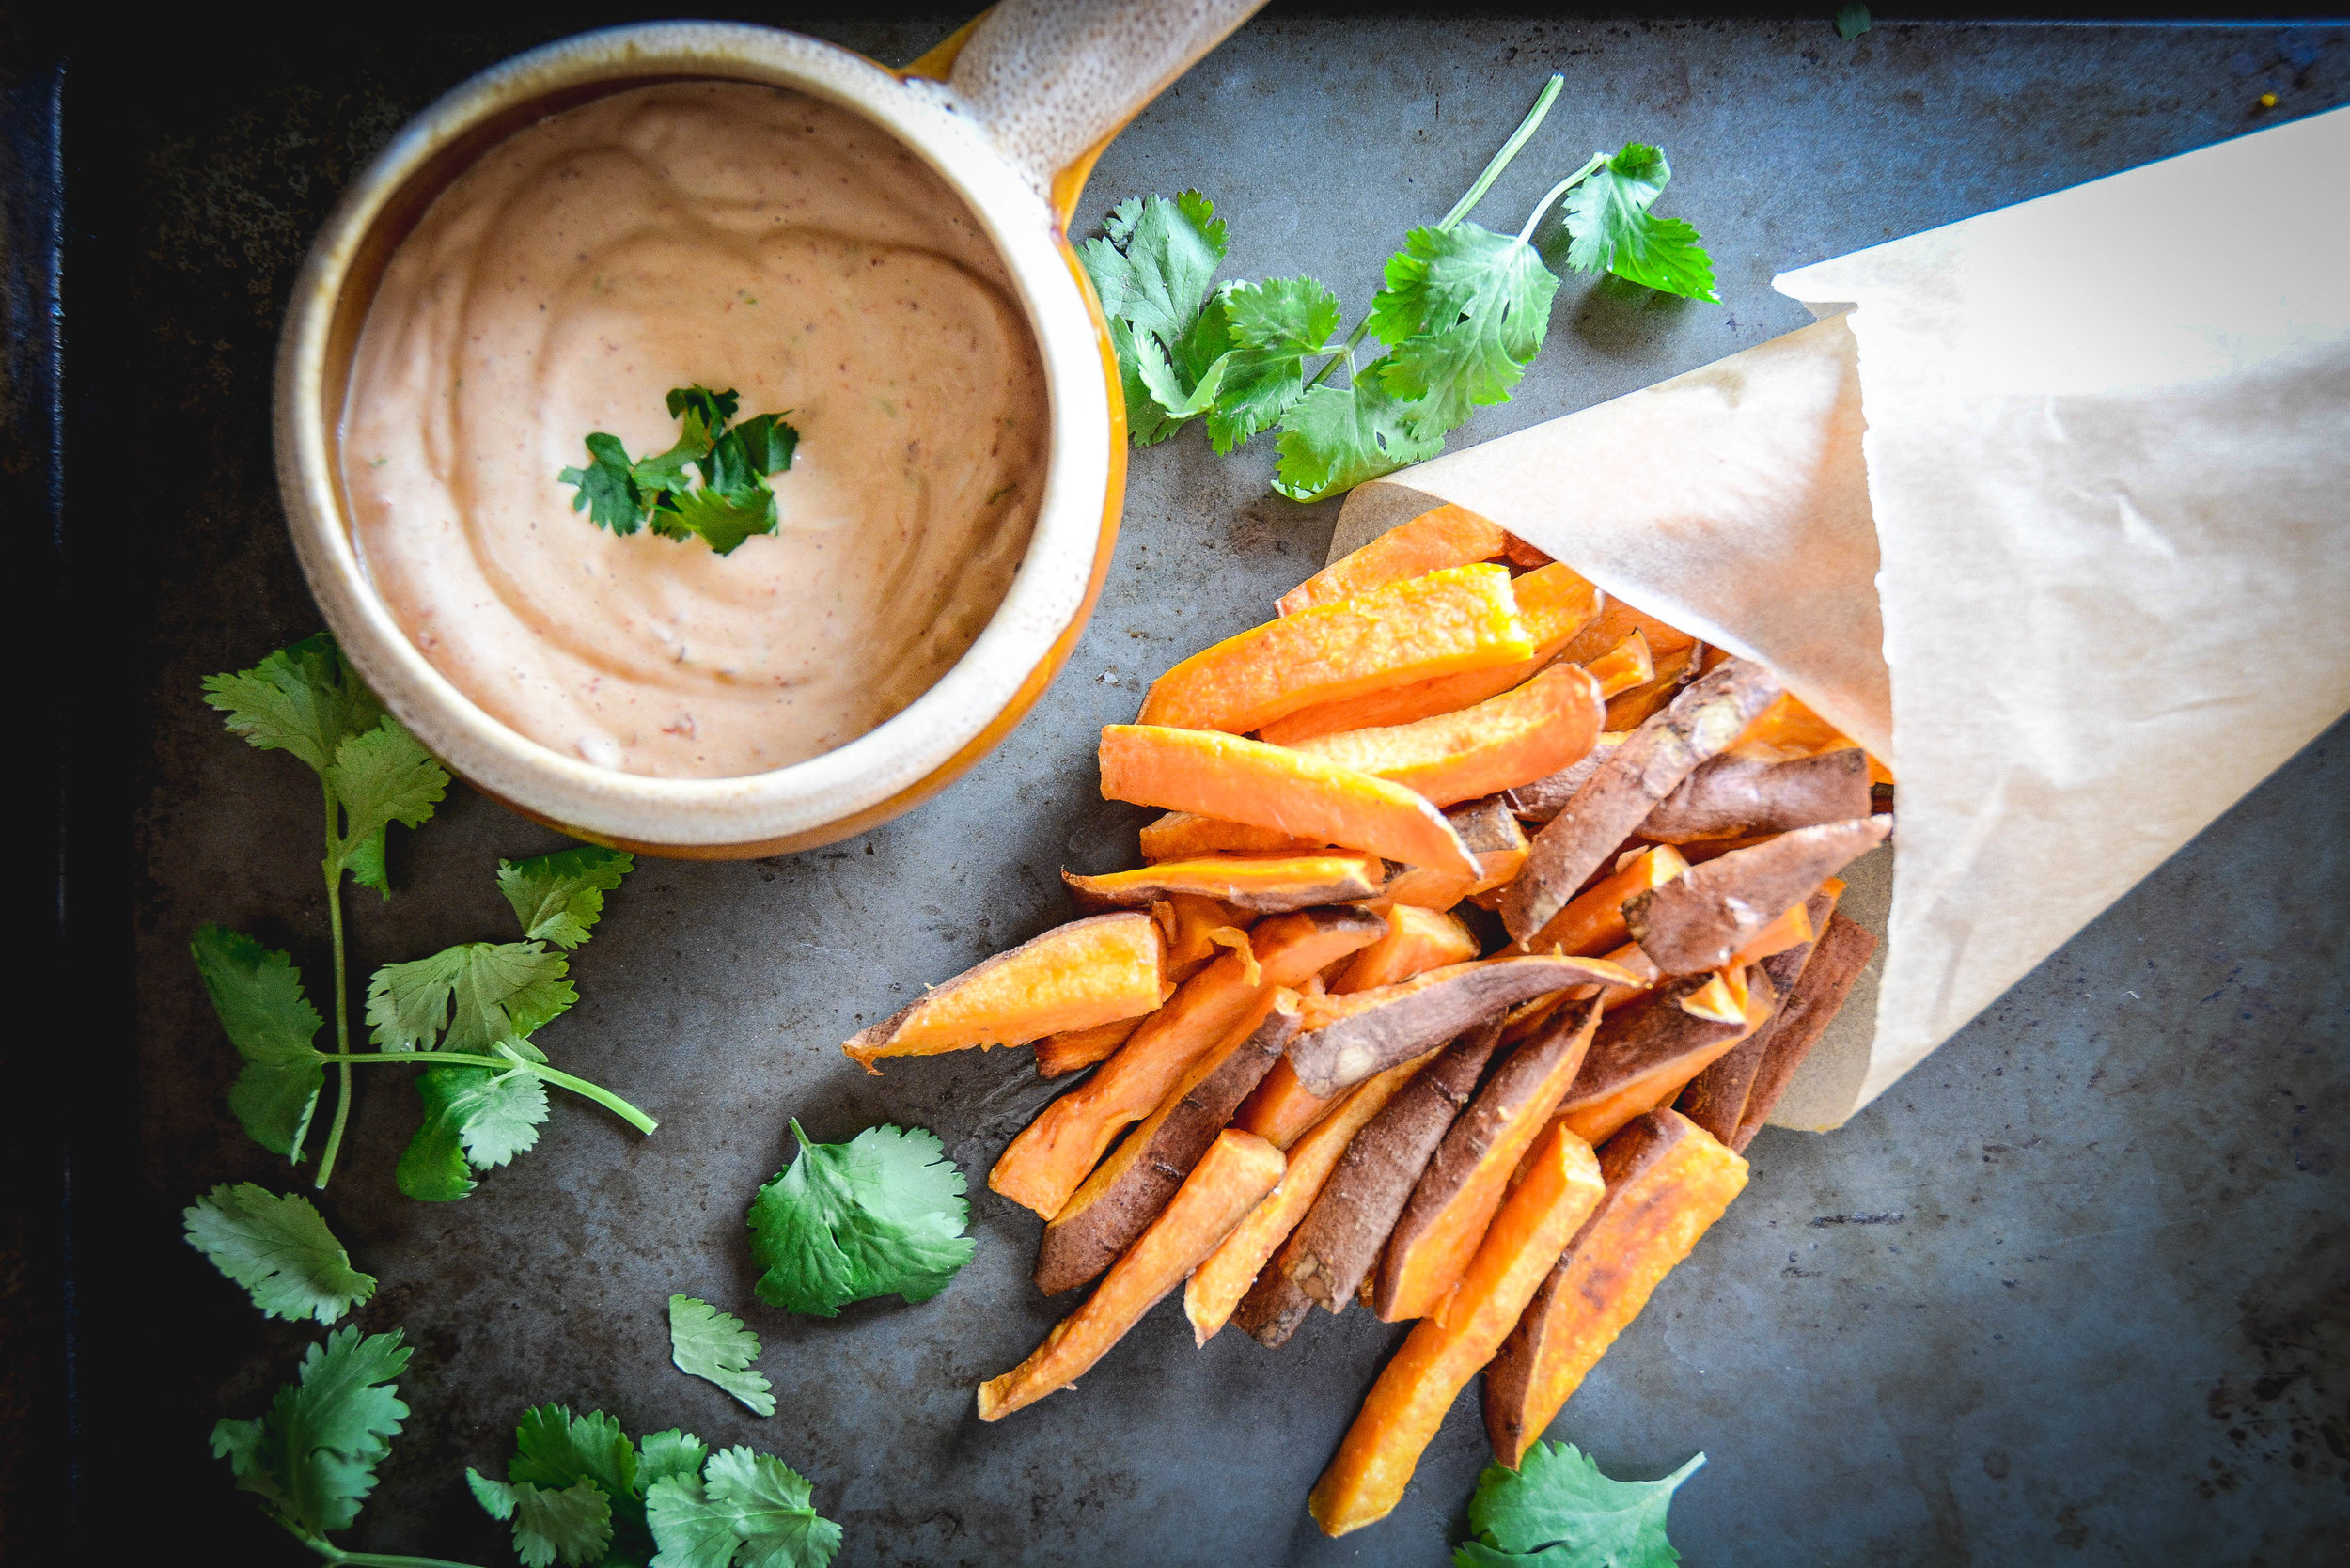 Sweet Potato Fries with Chipotle Lime Mayo - Calm Eats